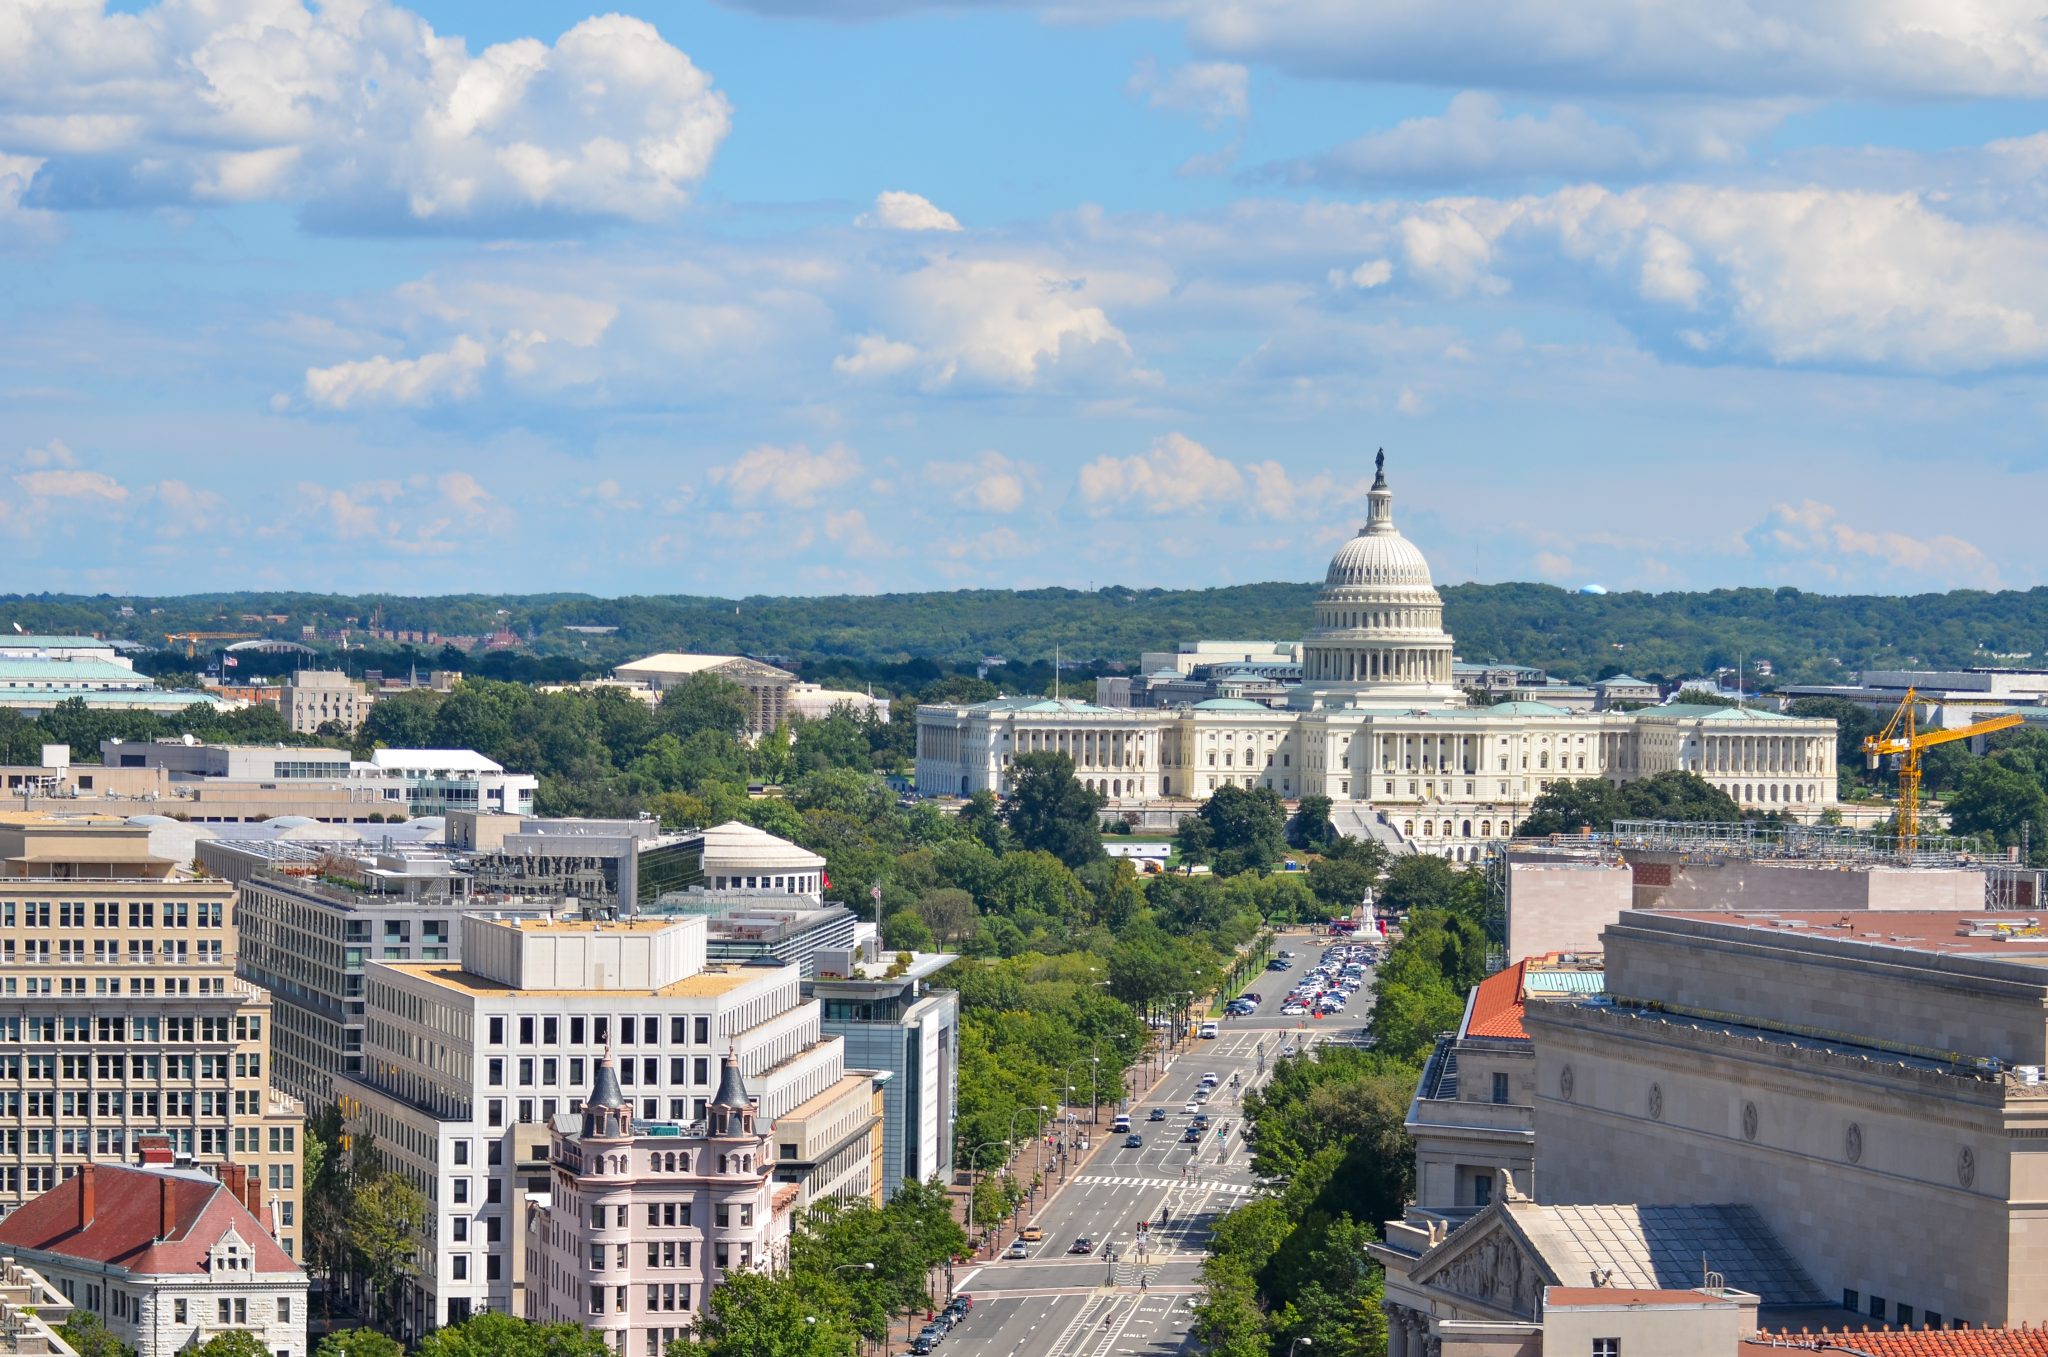 Virginia and DC Continue to be Leaders in Green Building